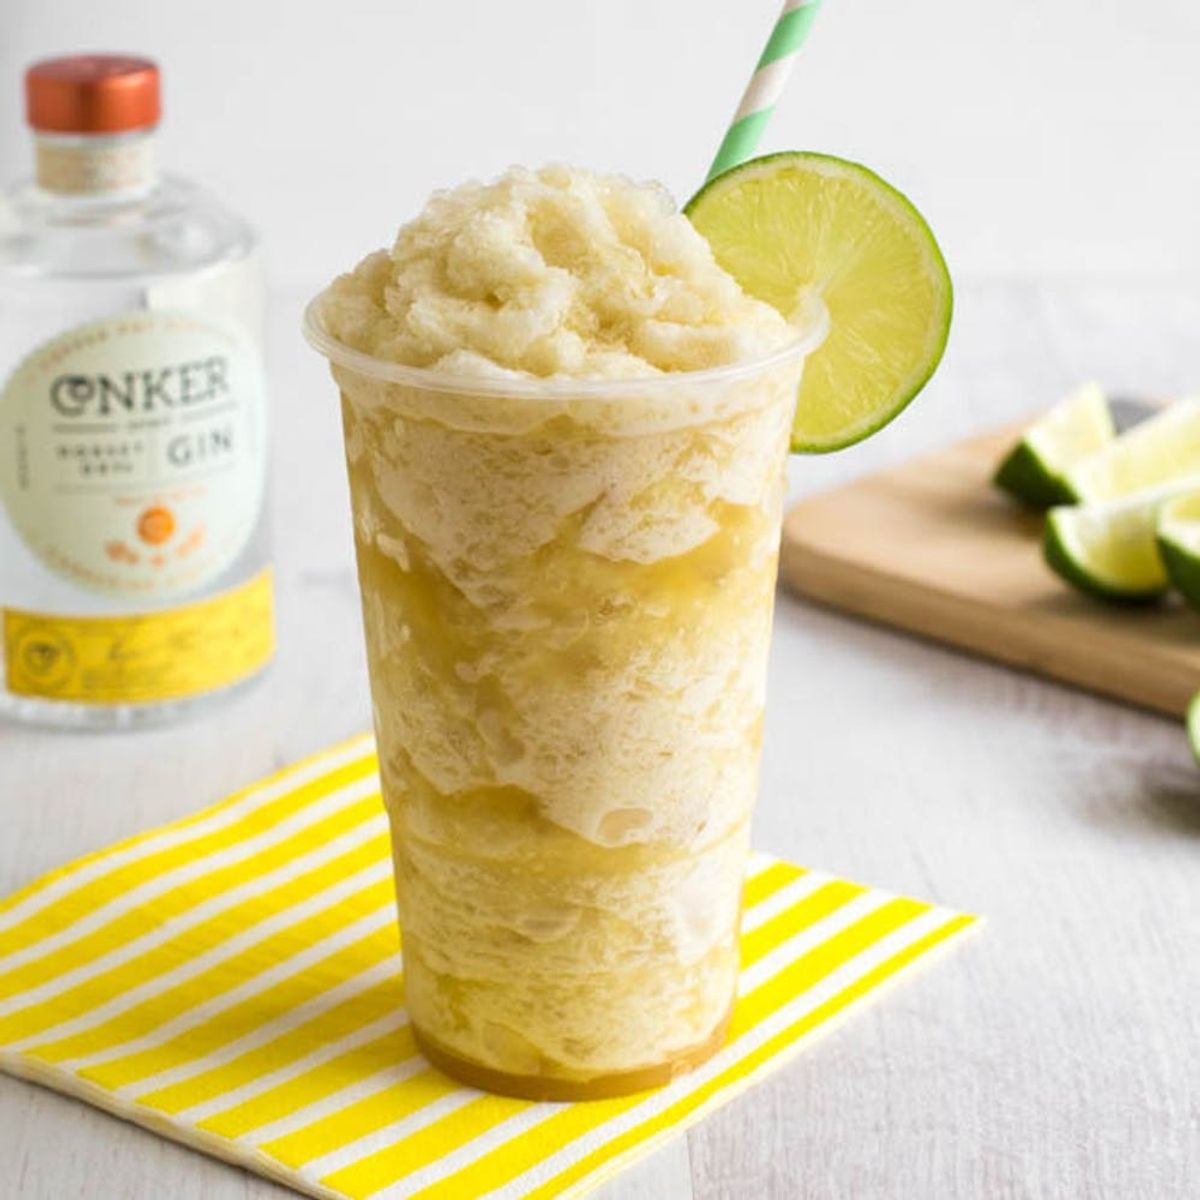 How to Make (Boozy!) Pineapple and Lime Slush Puppies